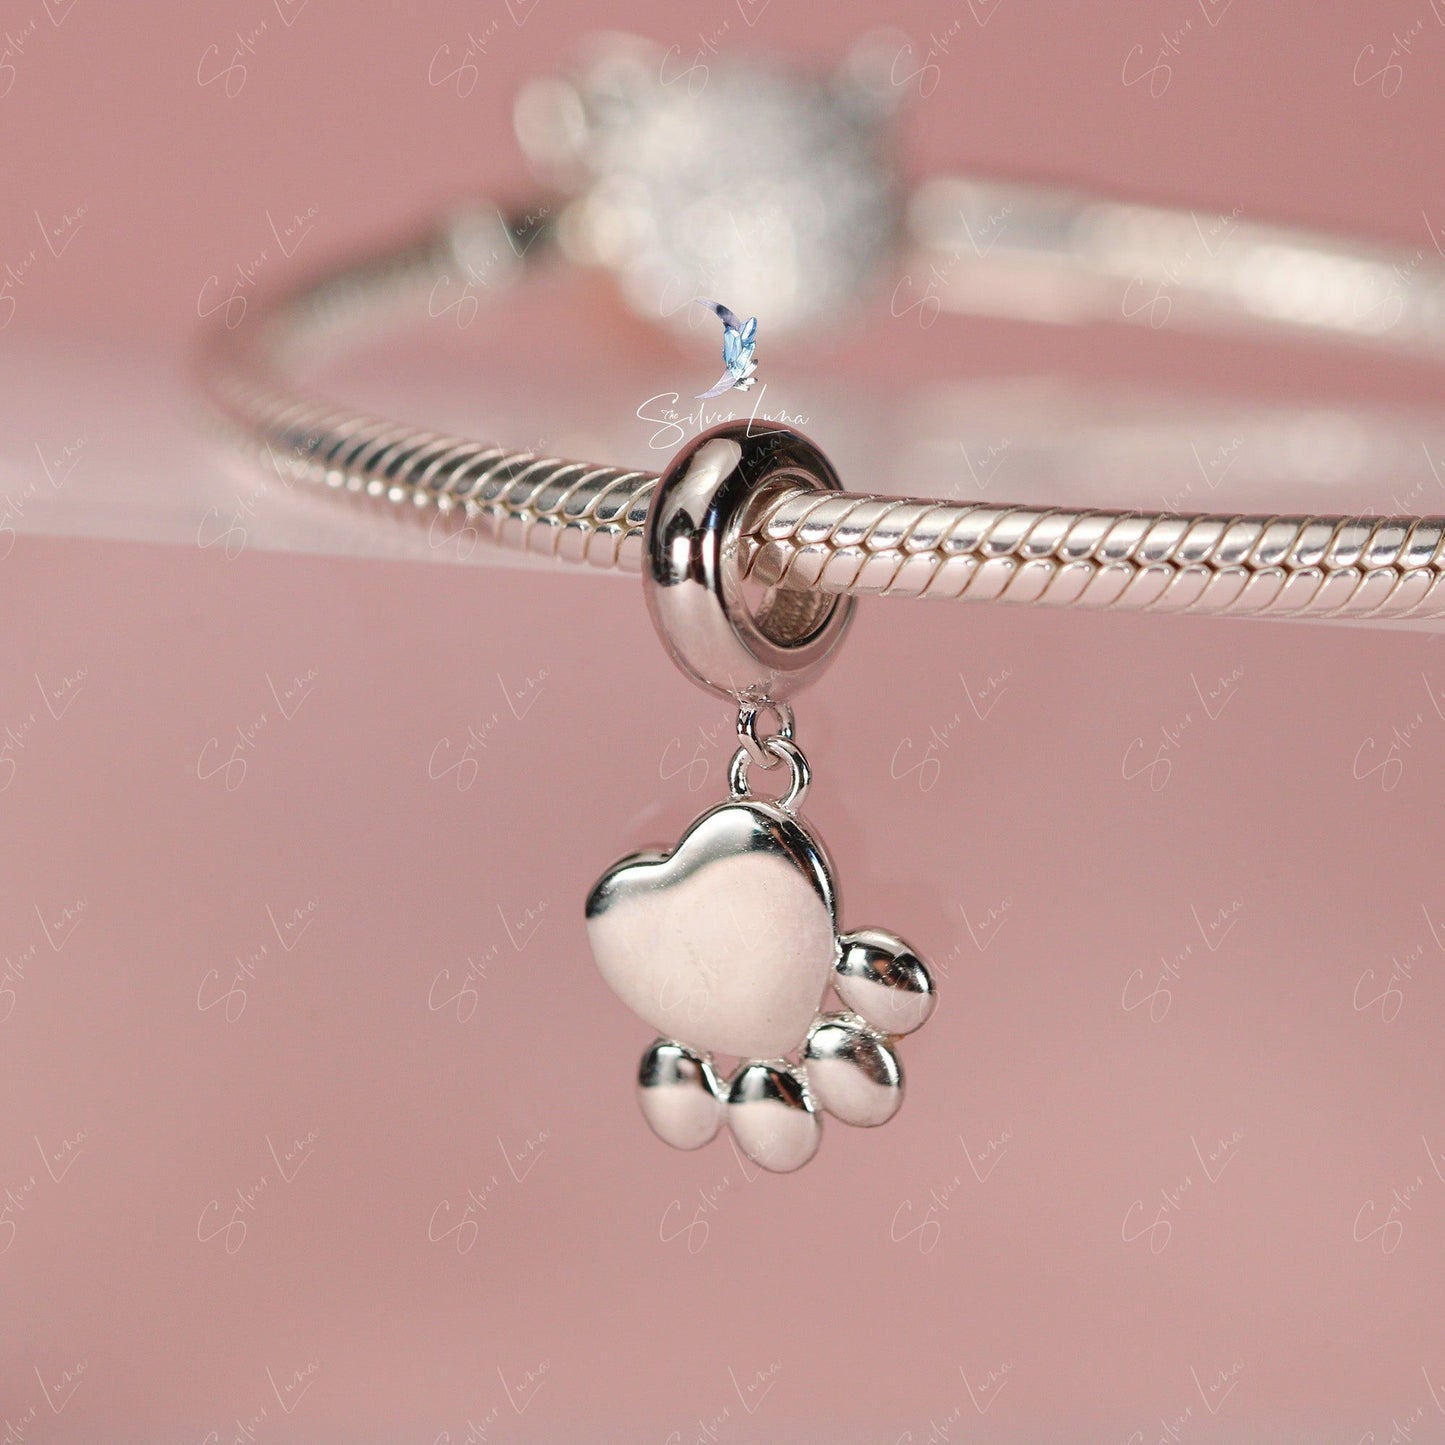 Opal dog paw sterling silver pendant charm